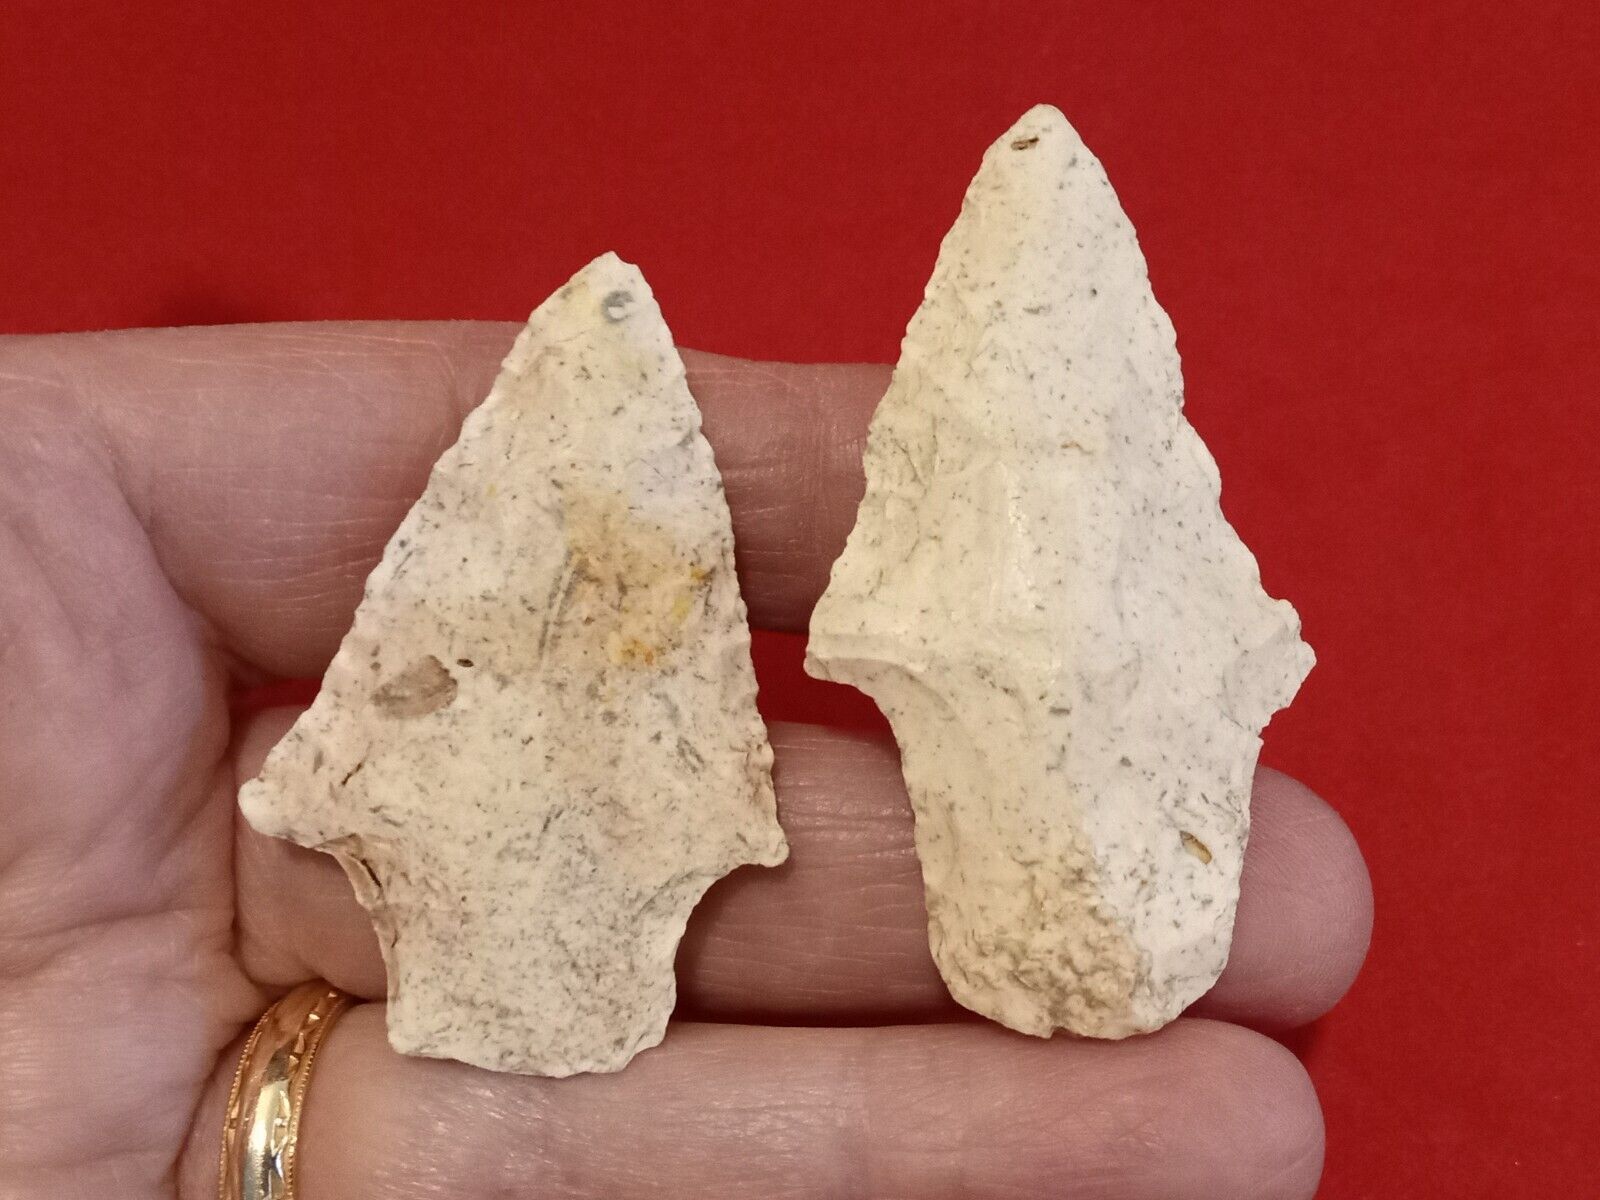 TWO AUTHENTIC GEORGIA POINTS - ADENA AND KIRK STEMMED - BOTH LAND FINDS